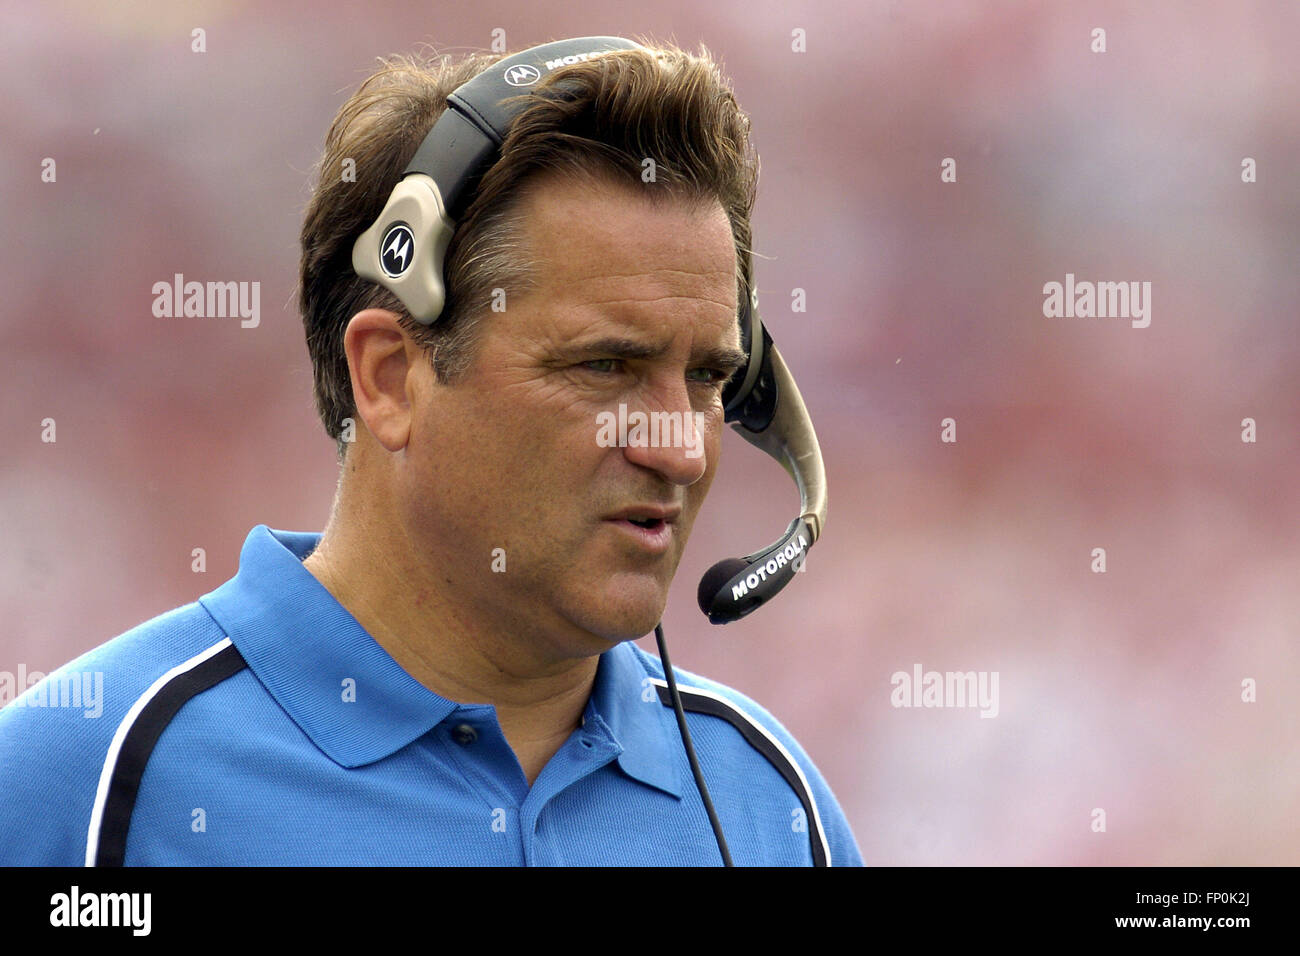 October 2, 2005 - Tampa, Florida, USA - Oct. 5, 2005; Tampa, FL, USA; Detroit Lions coach Steve Mariucci in action against the Tampa Bay Buccaneers during the Bucs 17-13 win at Raymond James Stadium. (Credit Image: © Scott A. Miller via ZUMA Wire) Stock Photo